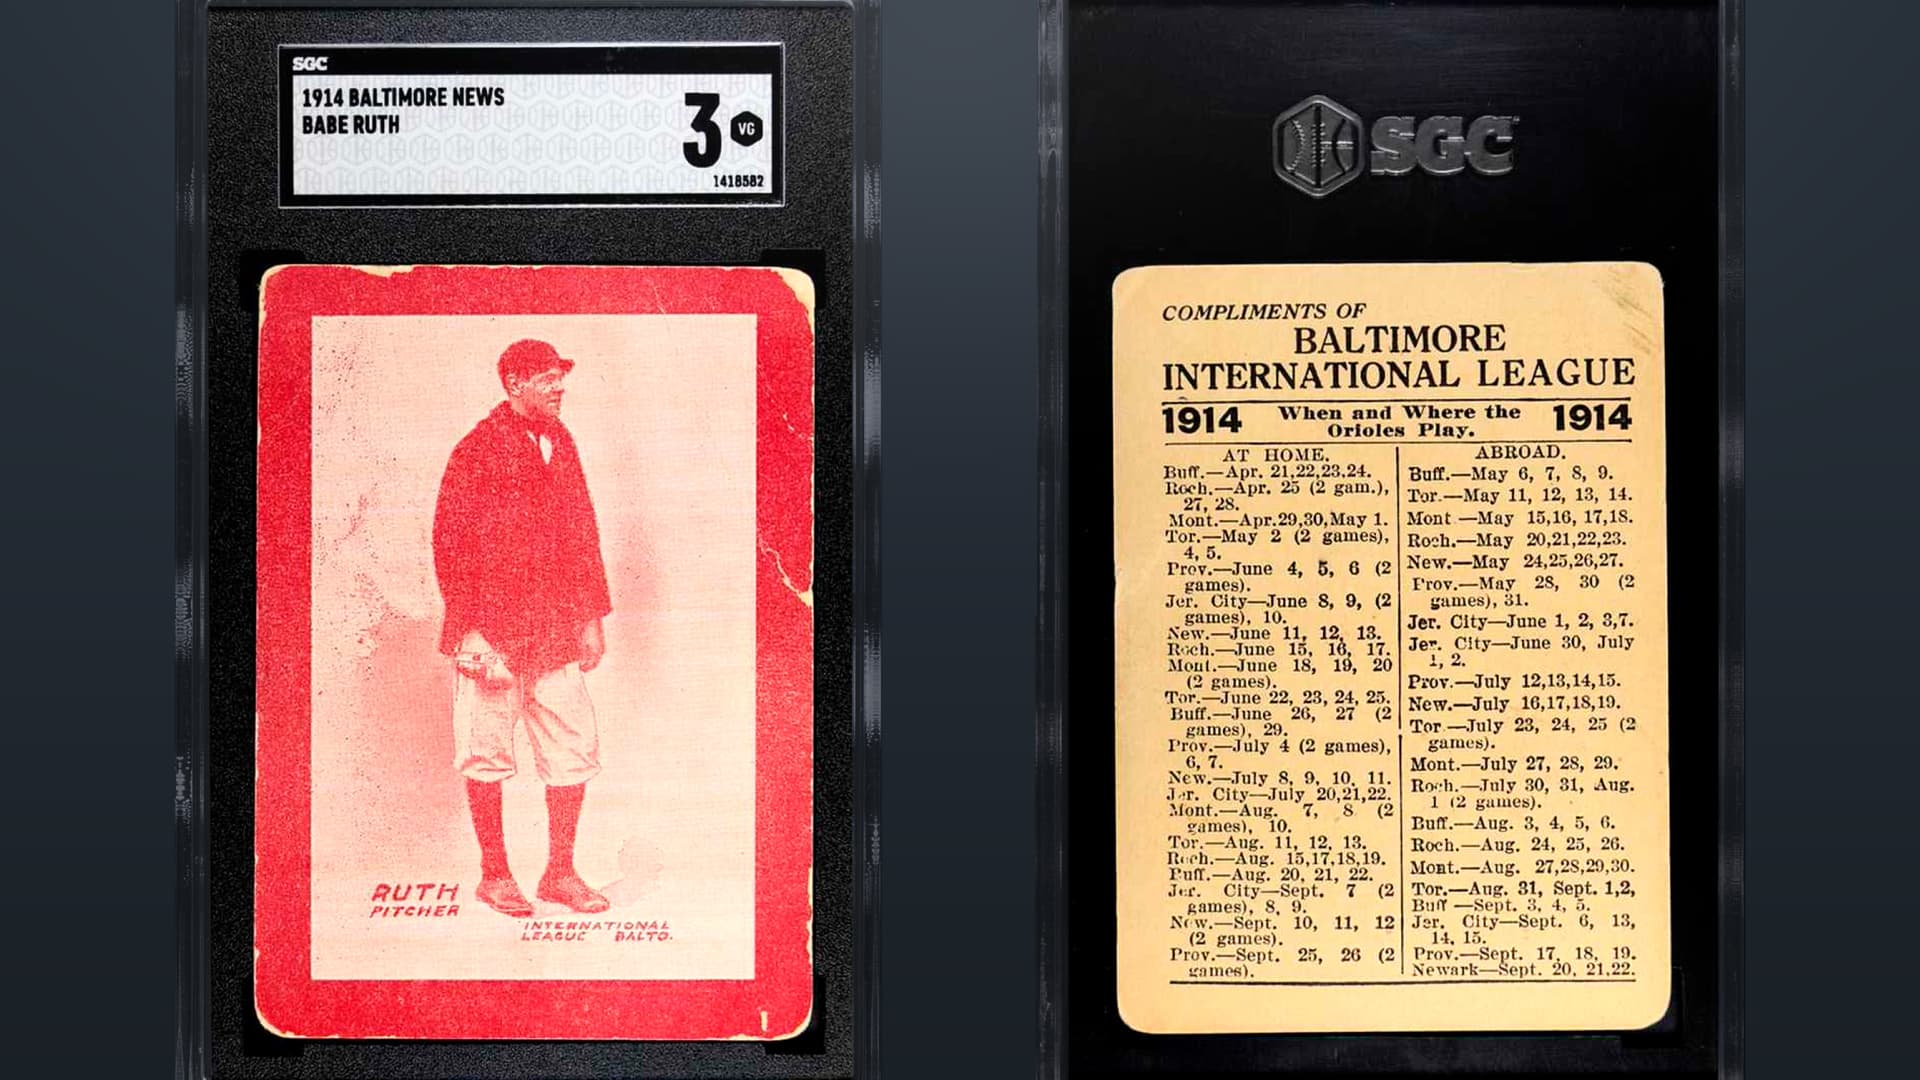 Babe Ruth S 1914 Baltimore Card Valued At 6 Million Sells For Record Price Us Message Board 🦅